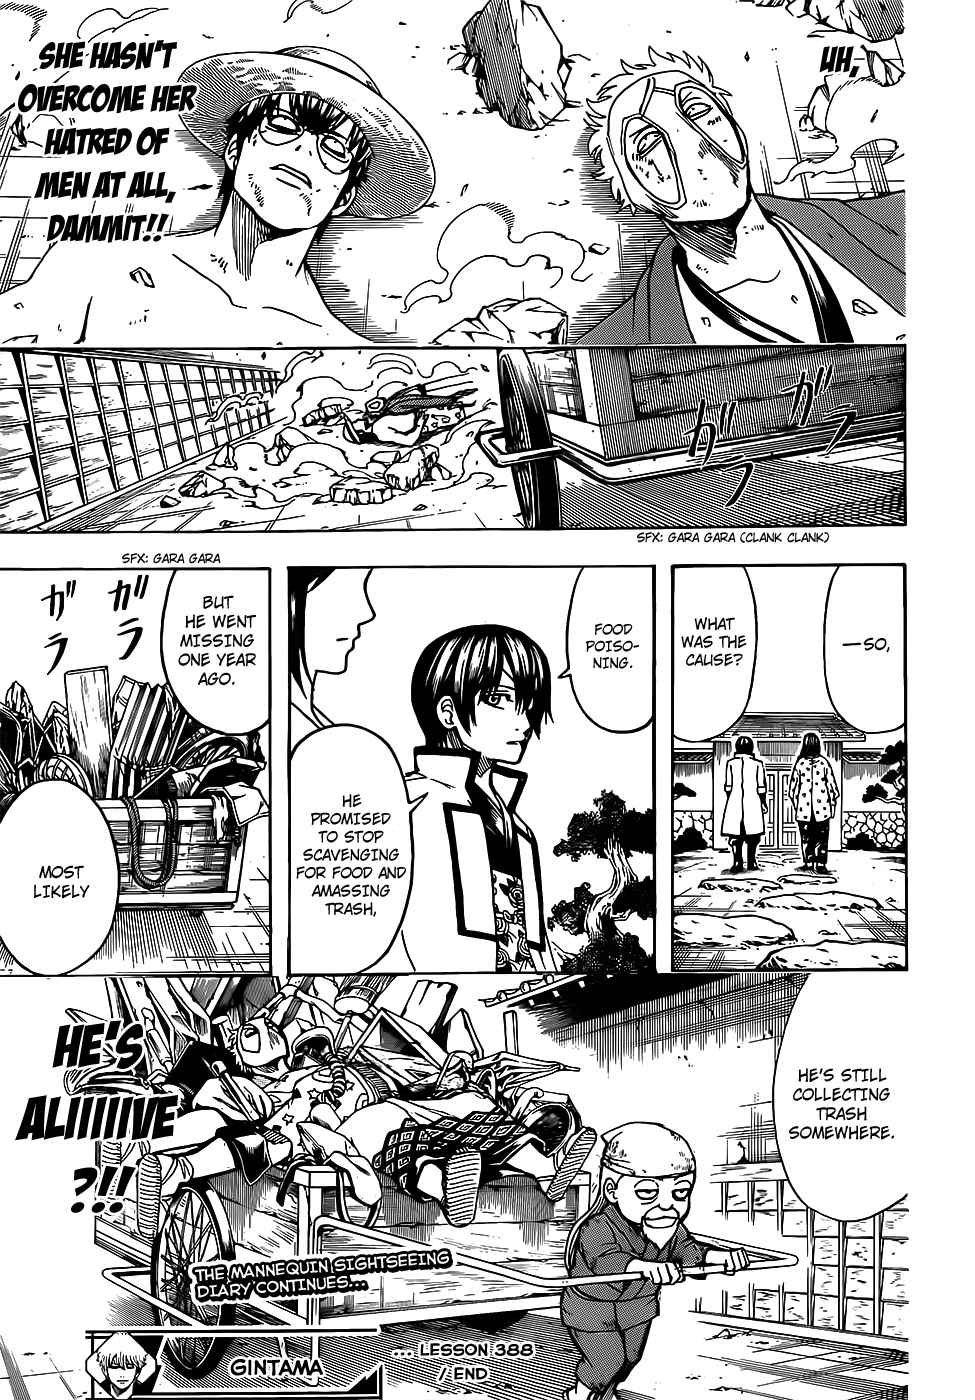 Gintama Vol. 76 Ch. 684 The Trick to Dieting is to not Always Strain Yourself, So...